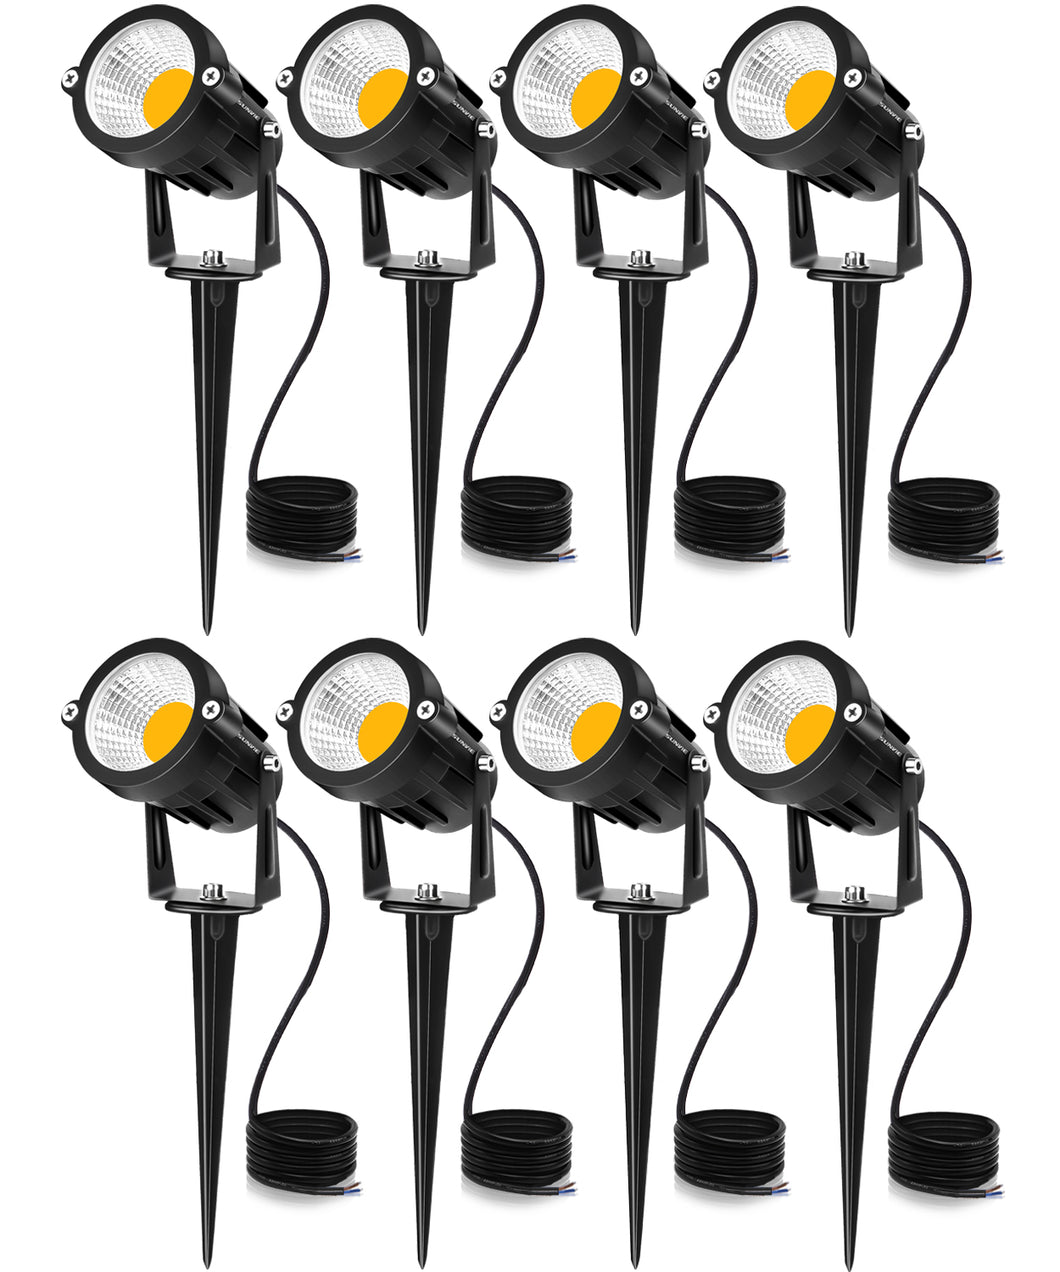 SUNVIE 12W LED Landscape Lights Low Voltage (AC/DC 12V) Waterproof Garden Pathway Lights Super Warm White (900LM) Walls Trees Flags Outdoor Spotlights with Spike Stand (8 Pack)